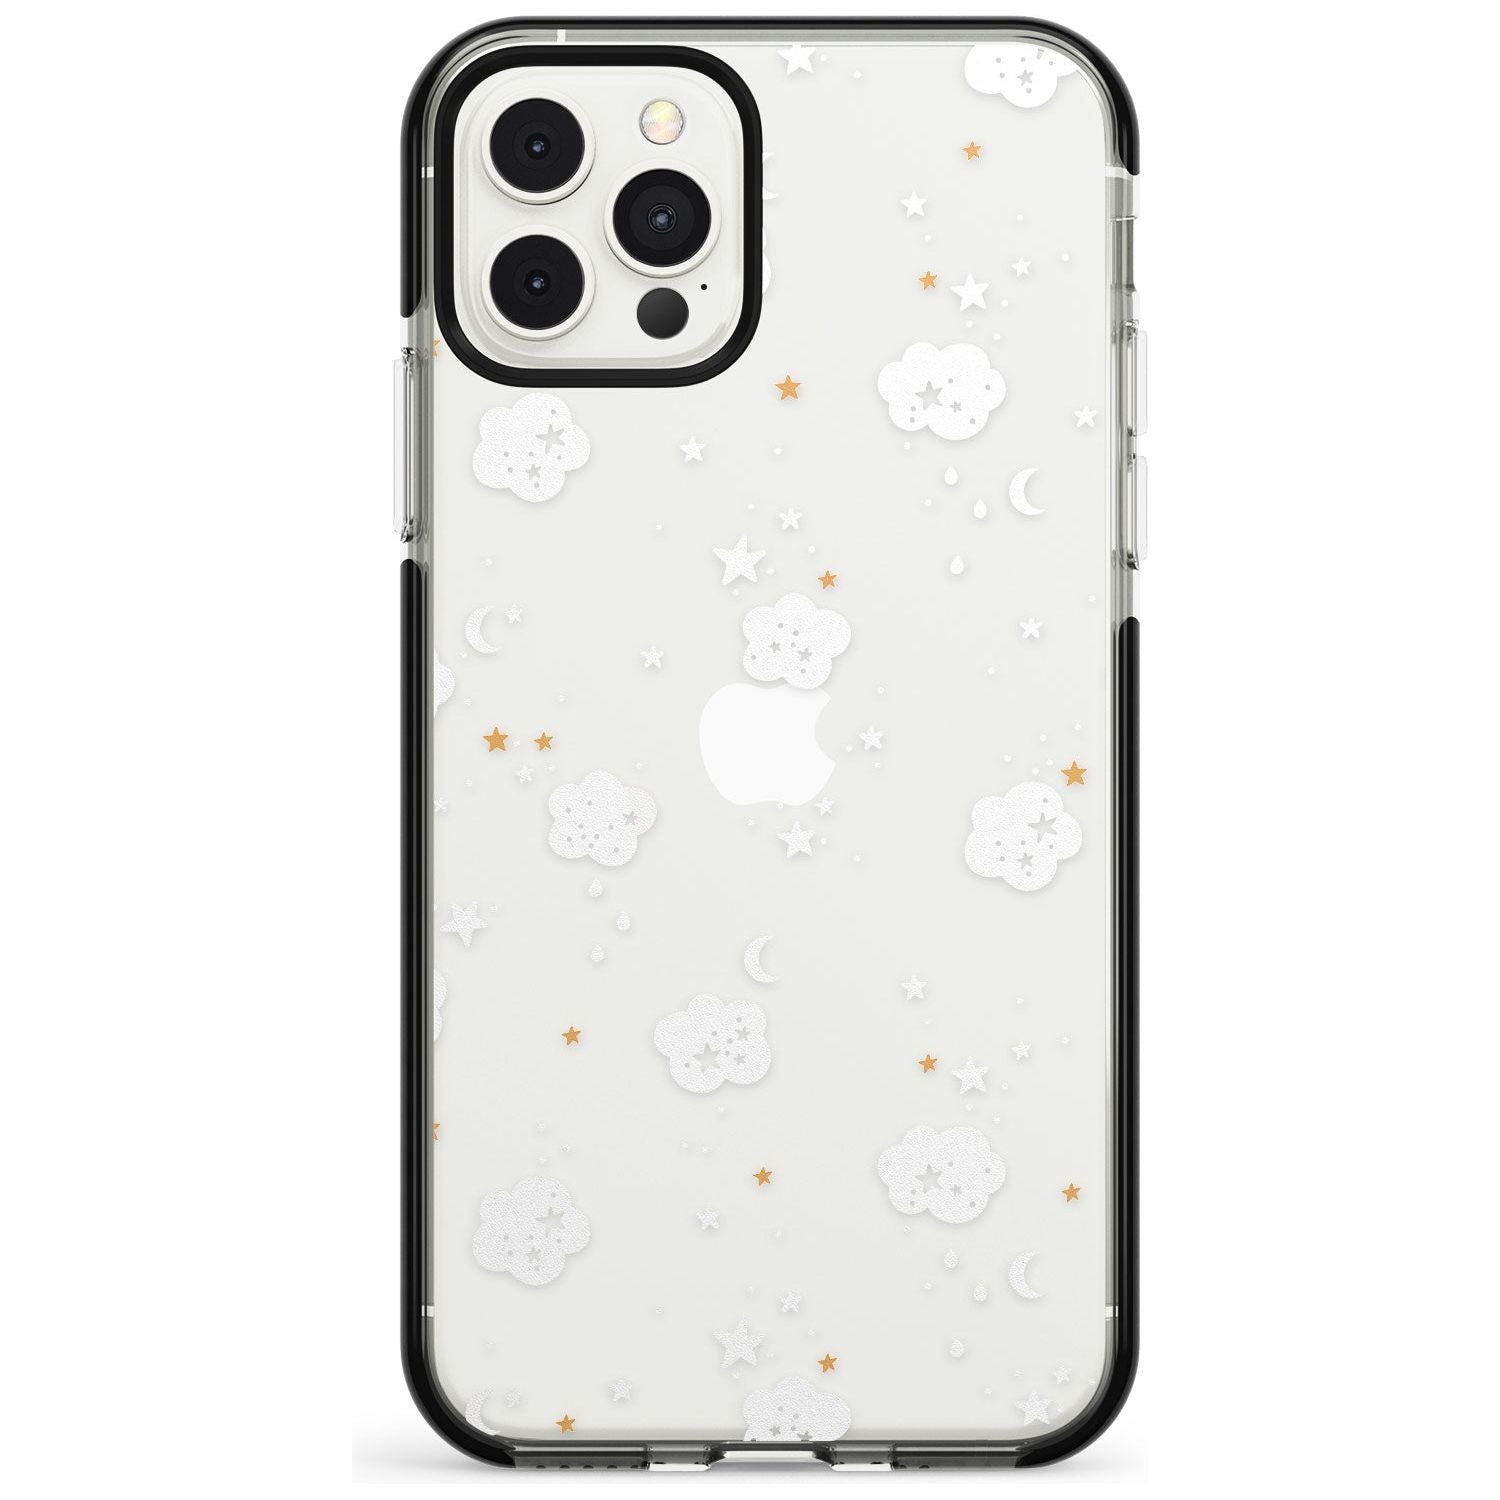 Stars & Clouds Pink Fade Impact Phone Case for iPhone 11